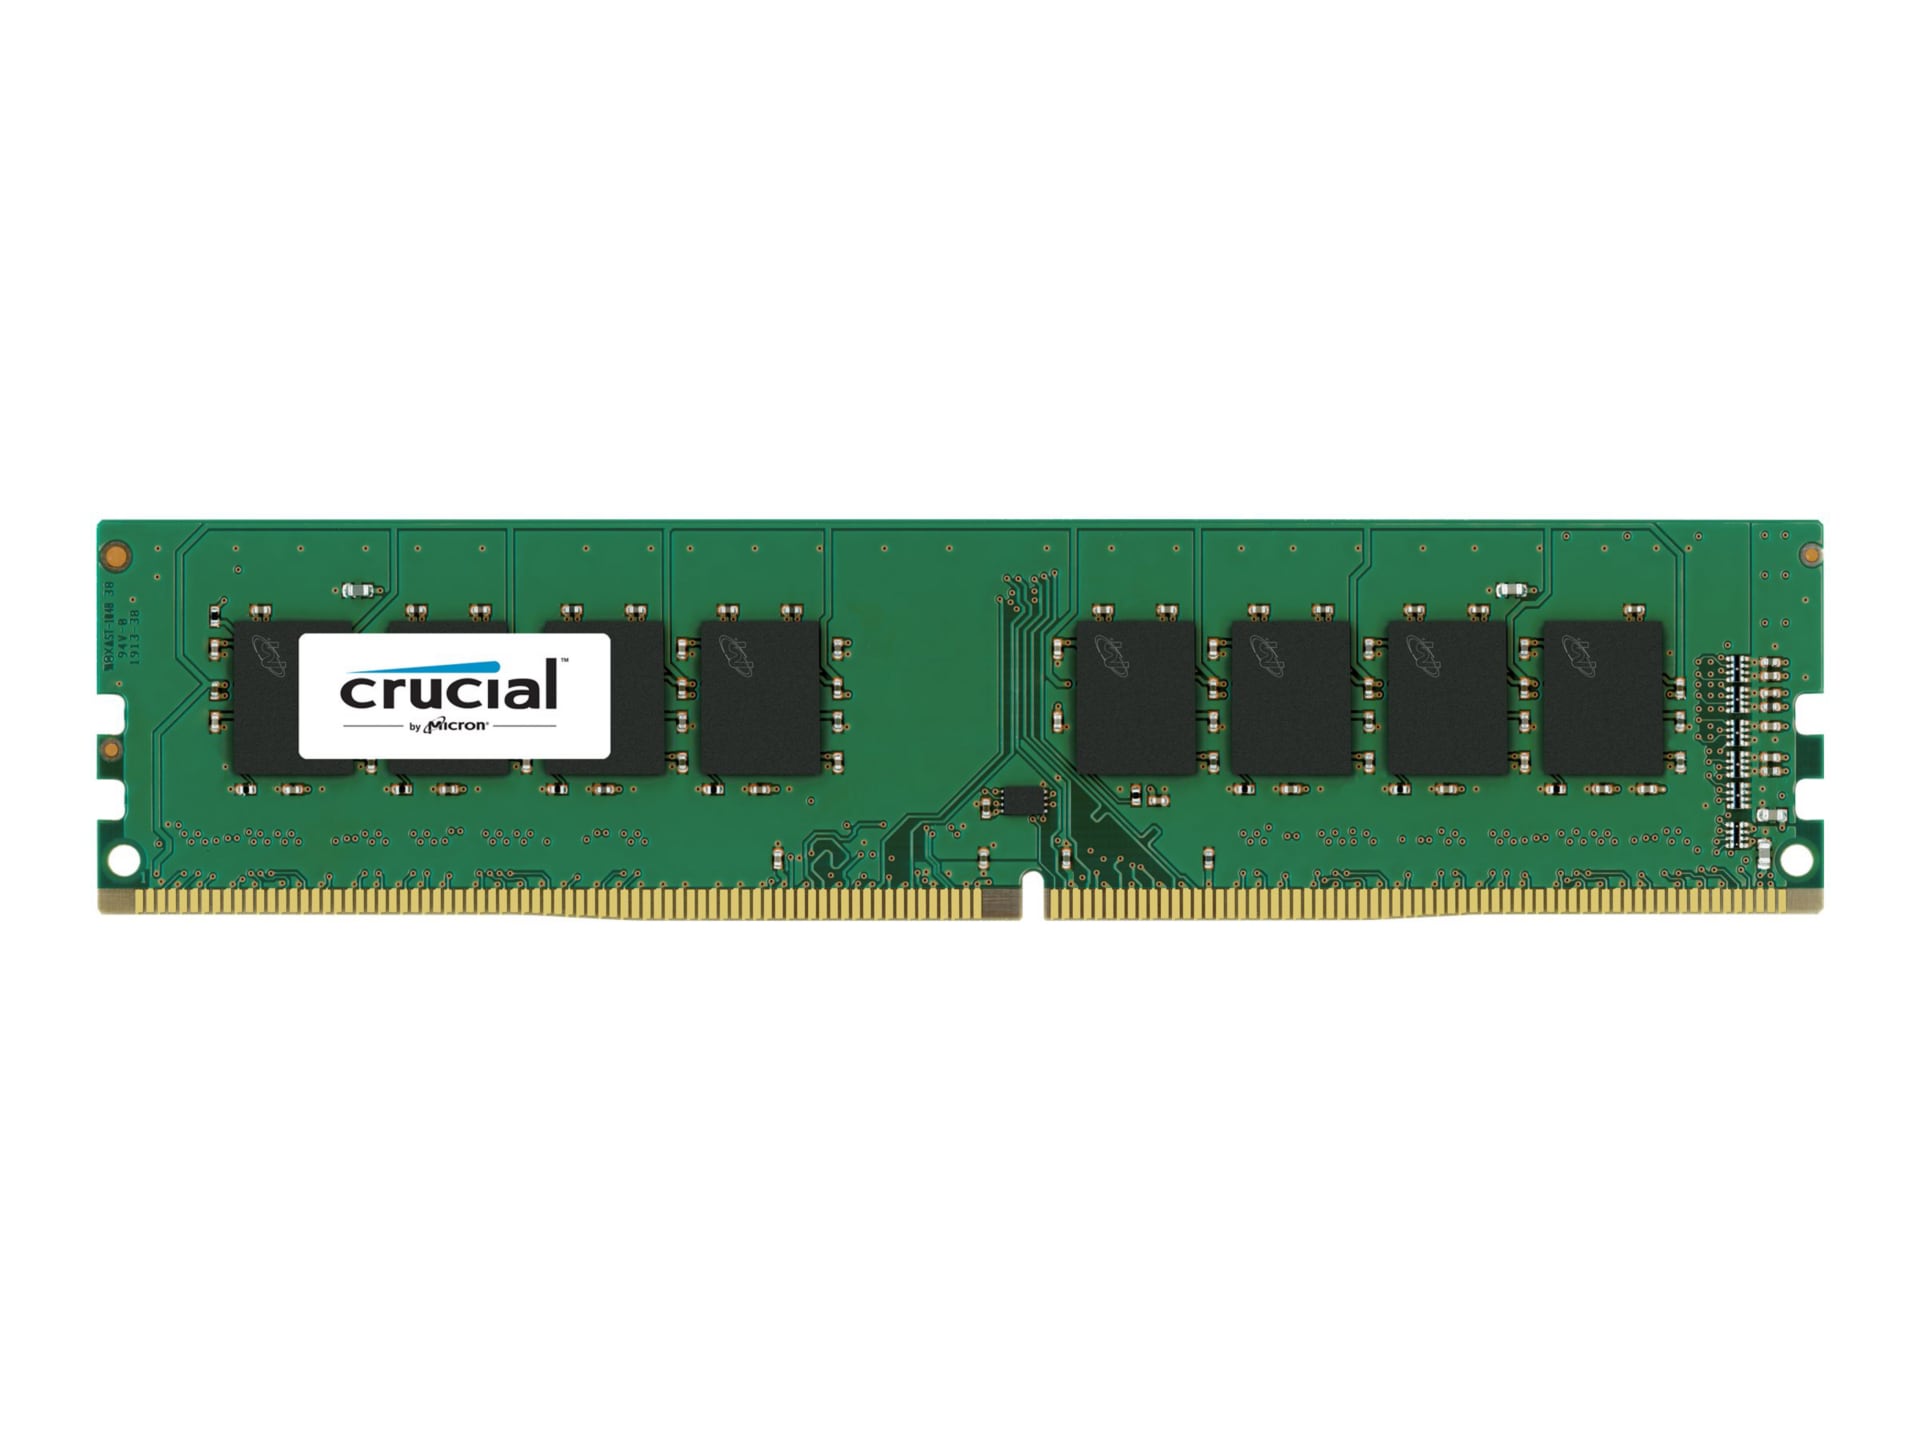 Crucial - DIMM - module - MHz - - - 8 - PC4-19200 Memory 2400 288-pin DDR4 / CT8G4DFS824A - GB unbuffered Computer